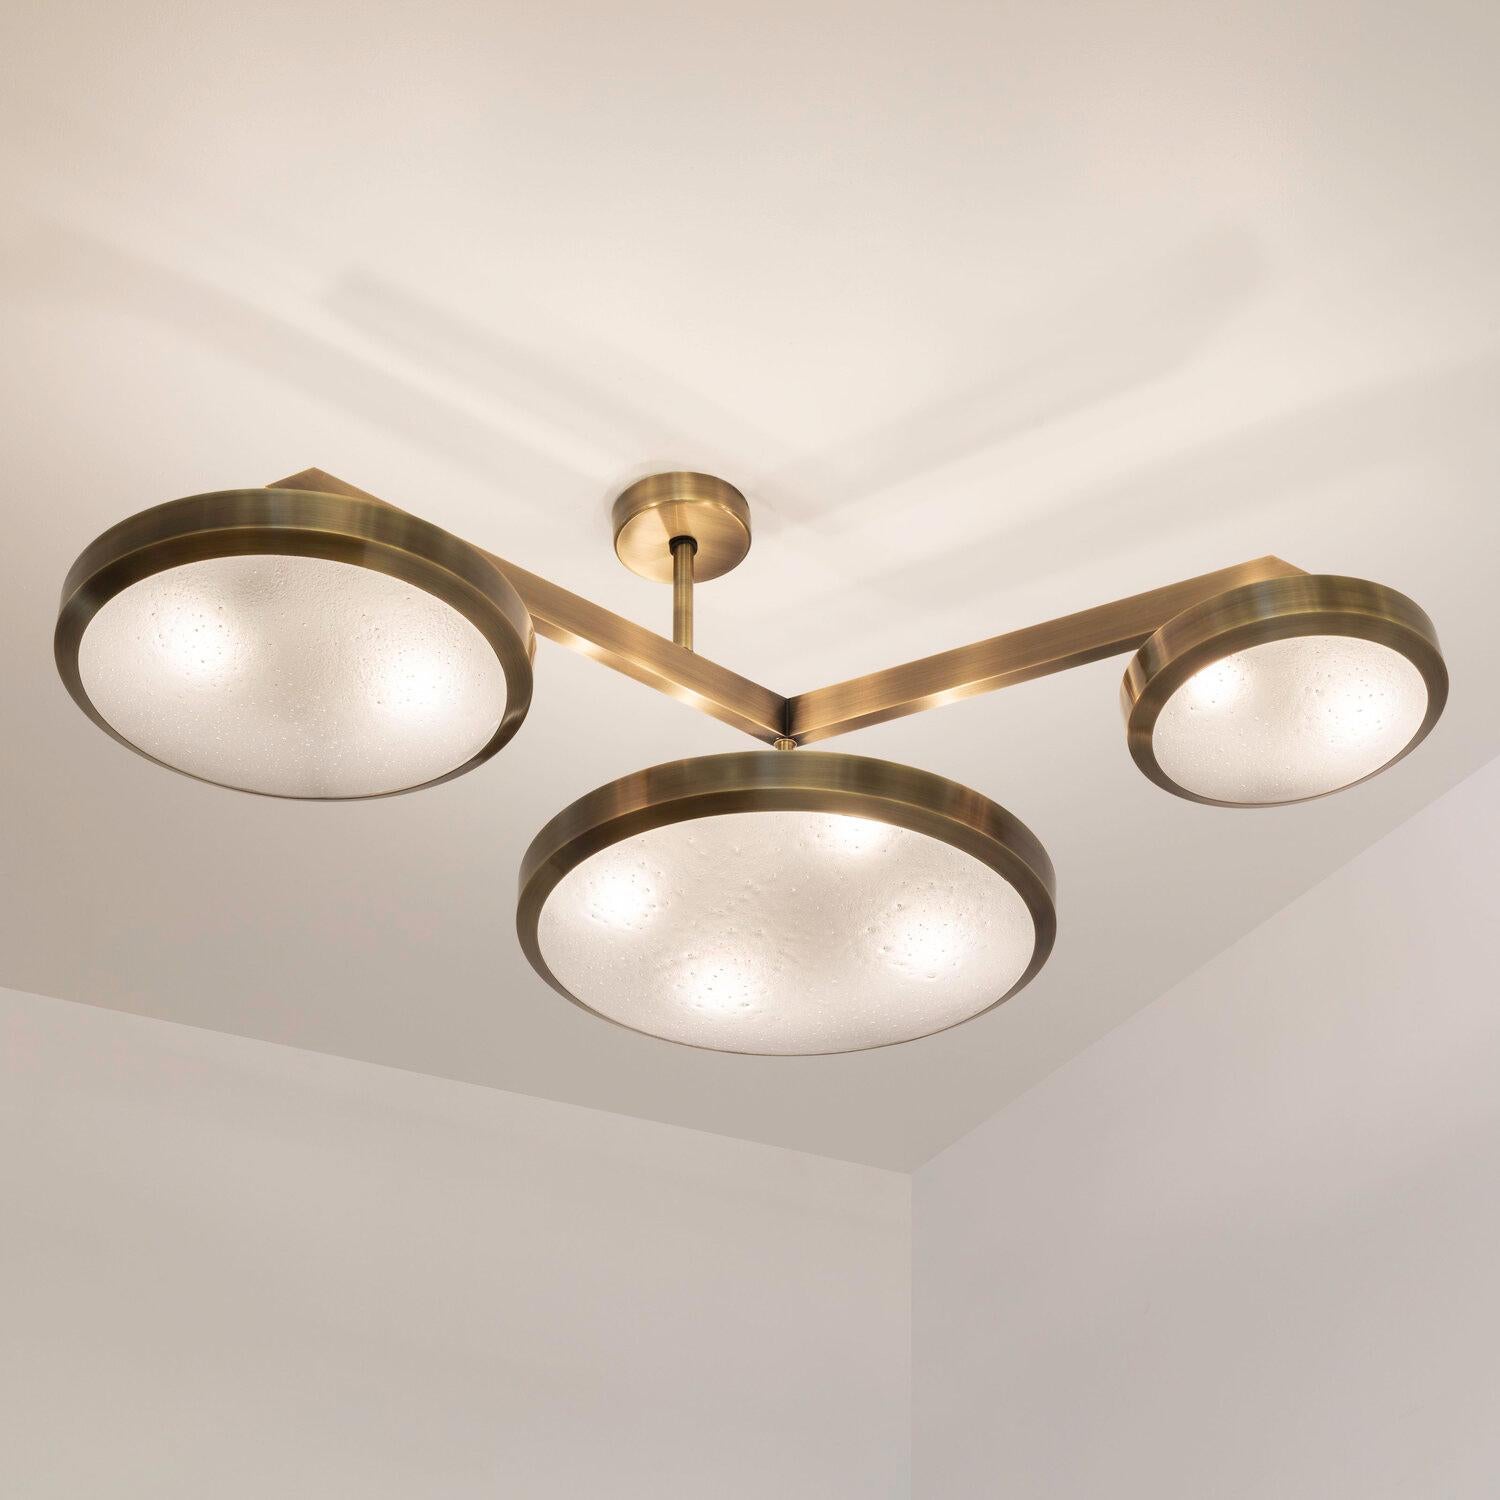 Zeta Ceiling Light by Gaspare Asaro- Two Tone Finish In New Condition For Sale In New York, NY